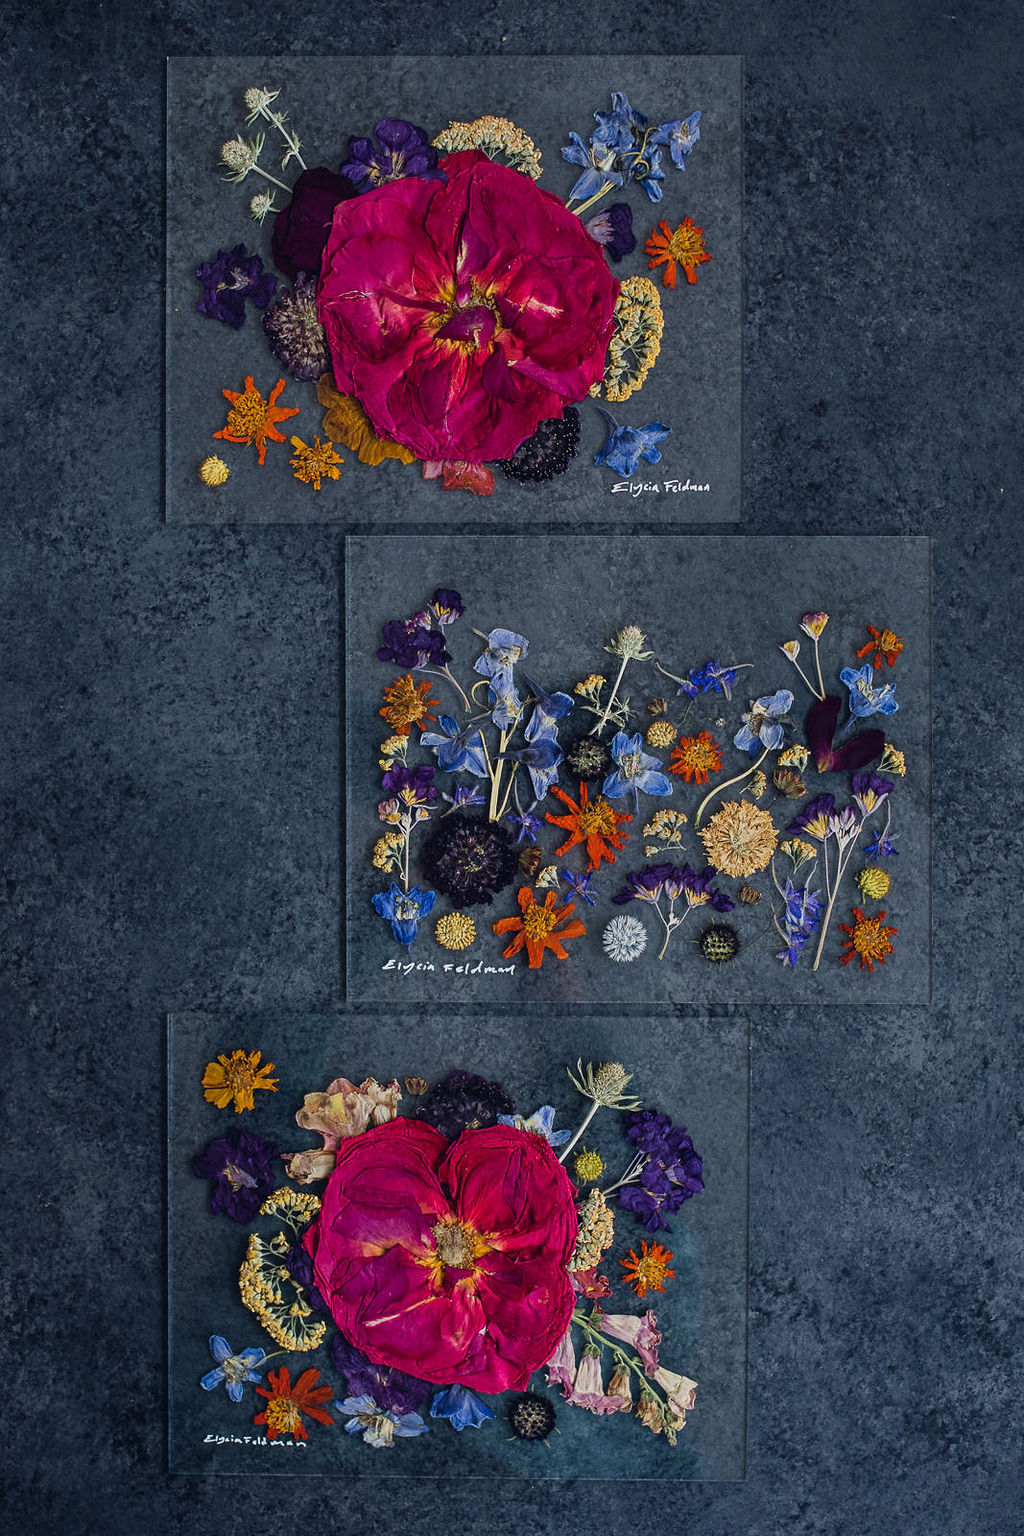 set of three pressed flower preservation art pieces using magenta rose and orange blue and purple flowers